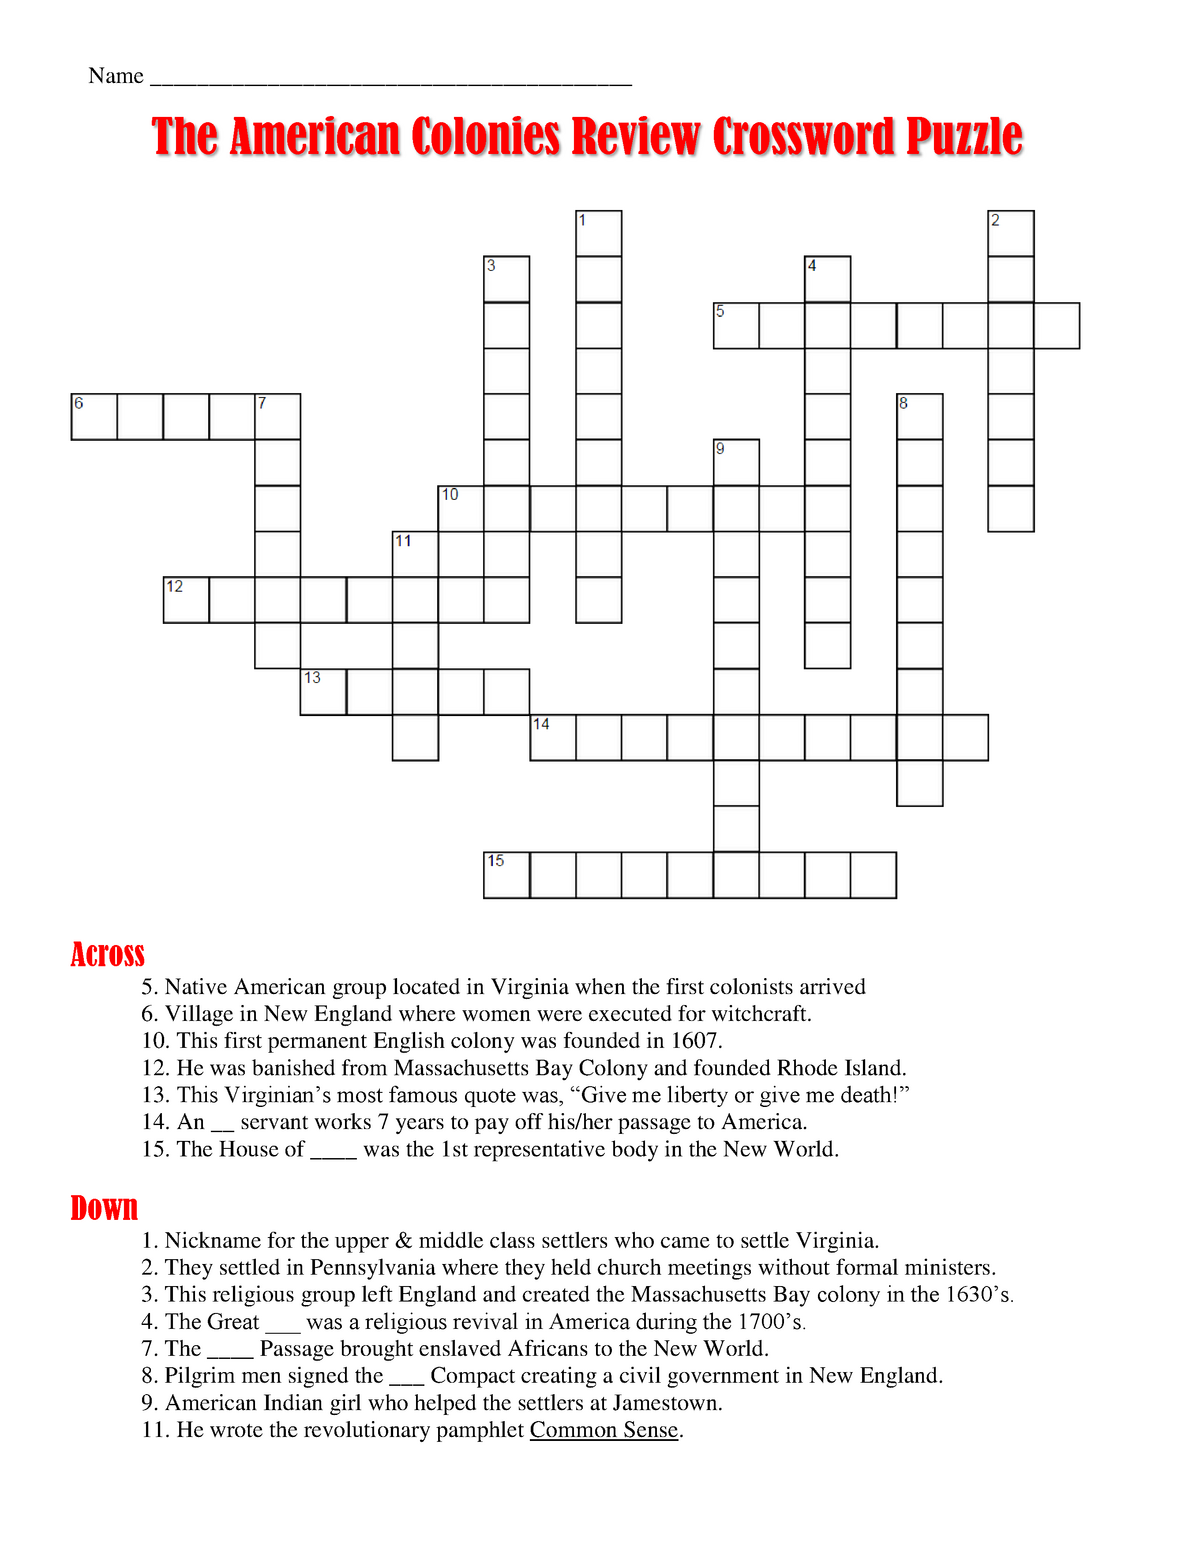 Colonies Review Crossword Puzzle Name